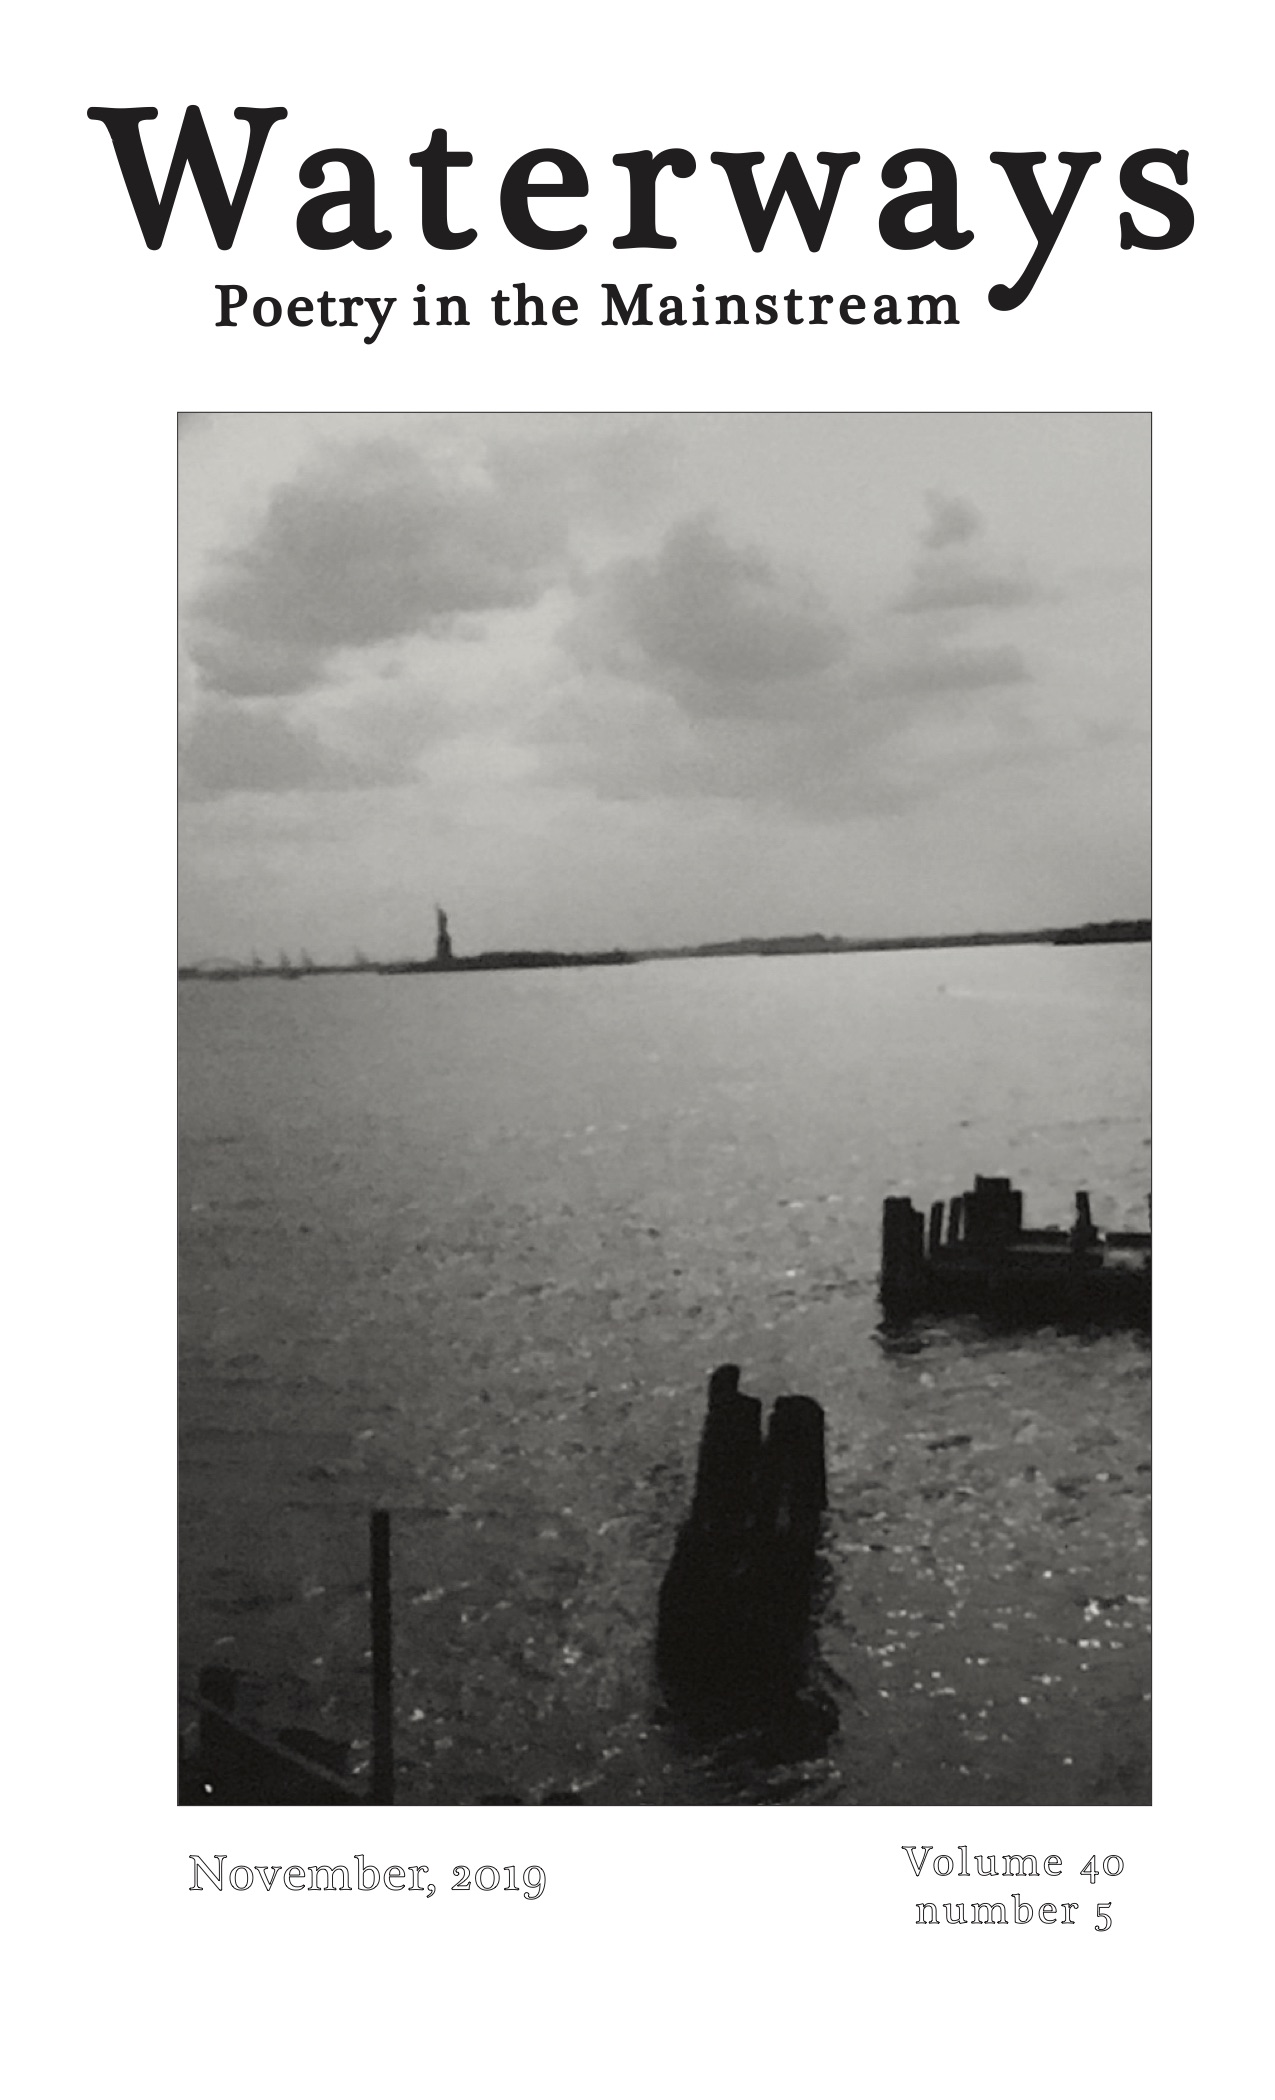 Statue of Liberty seen from a far shore on the bay